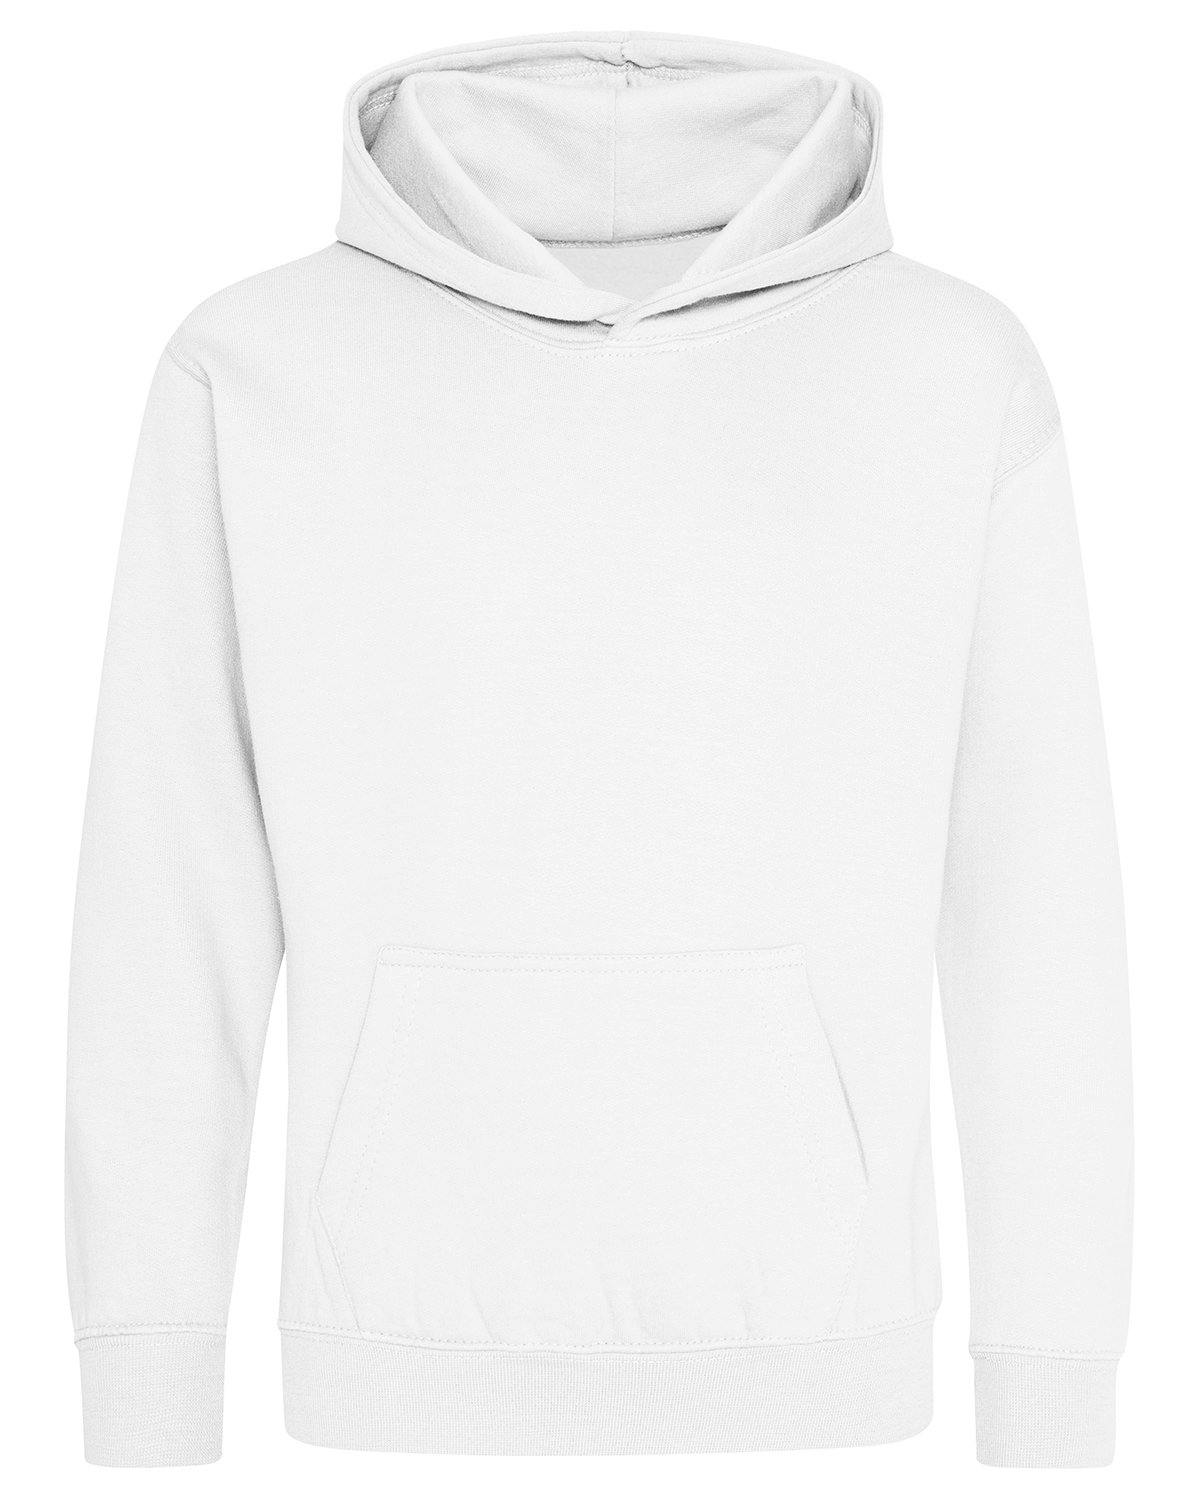 Image for Youth Midweight College Hooded Sweatshirt